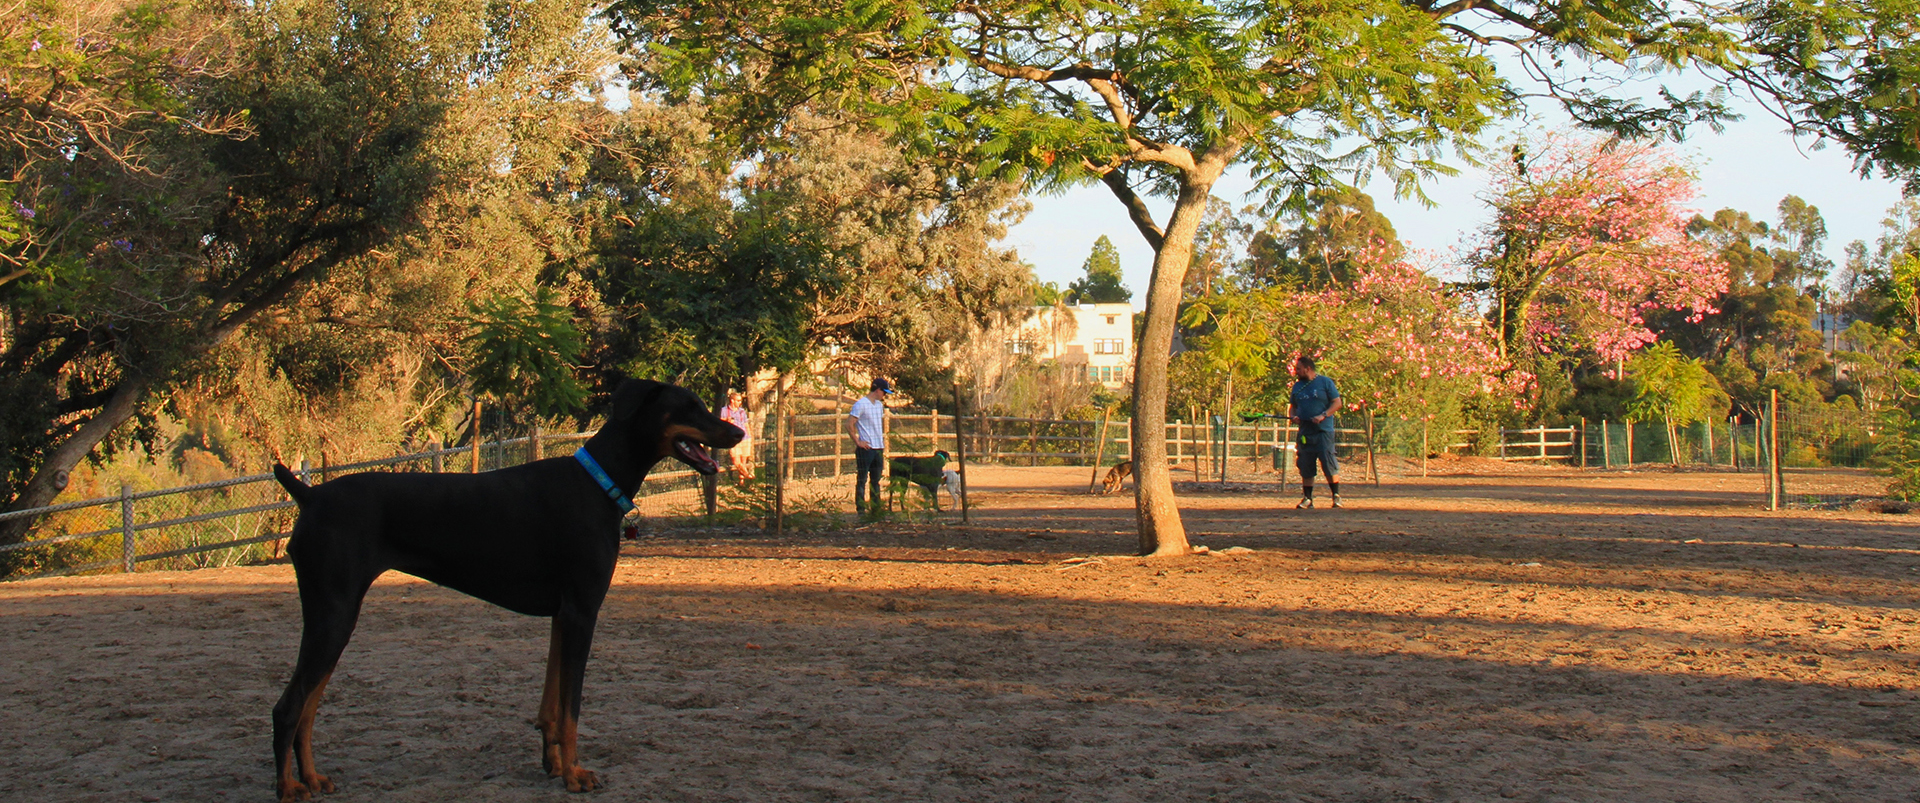 A doberman pincher dog wearing a blue collar standing under trees at a fenced in dog park.